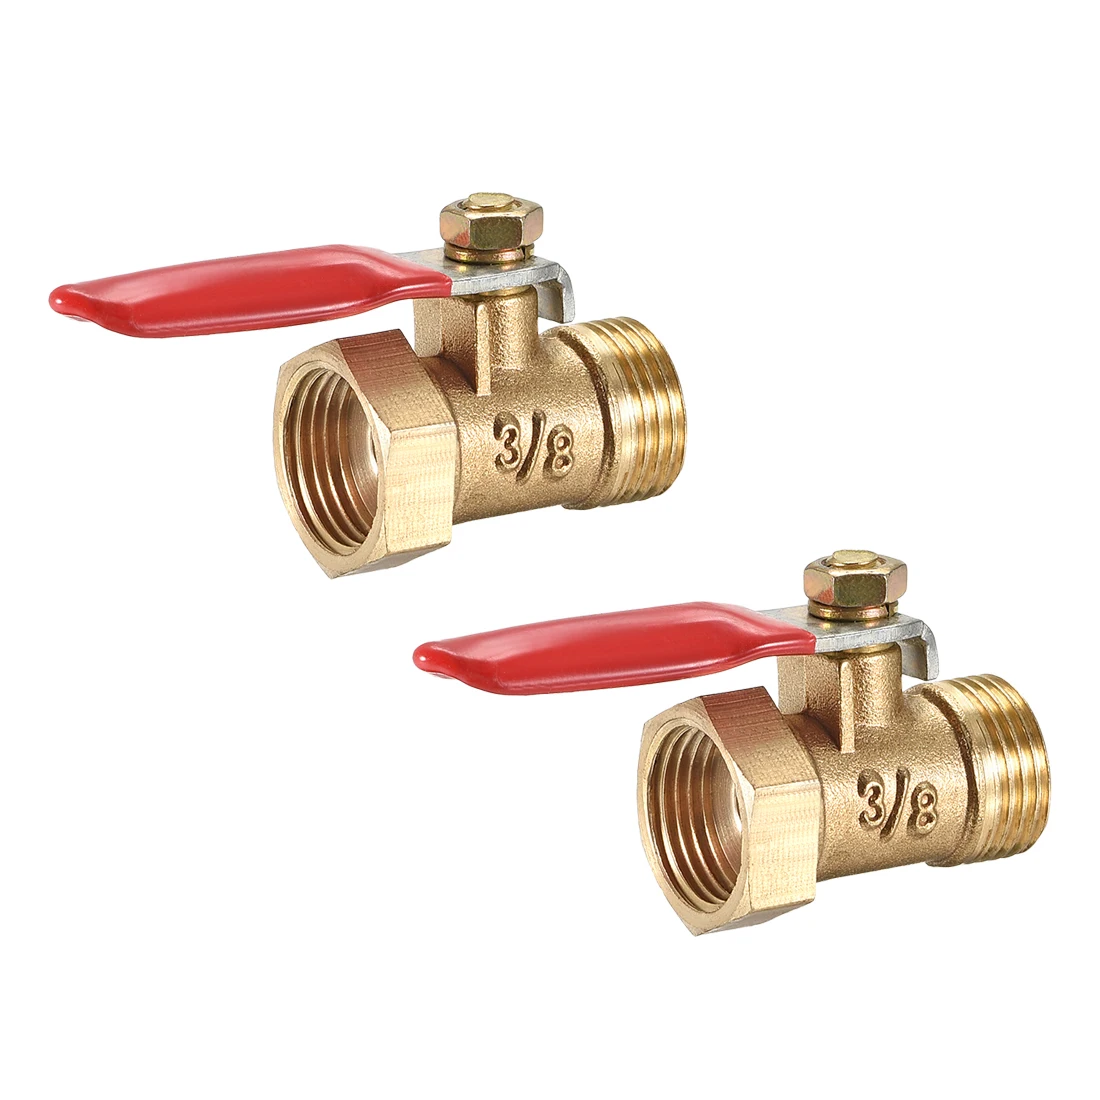 

uxcell Brass Air Ball Valve Shut Off Switch G3/8 Male to Female Pipe Coupler 2Pcs